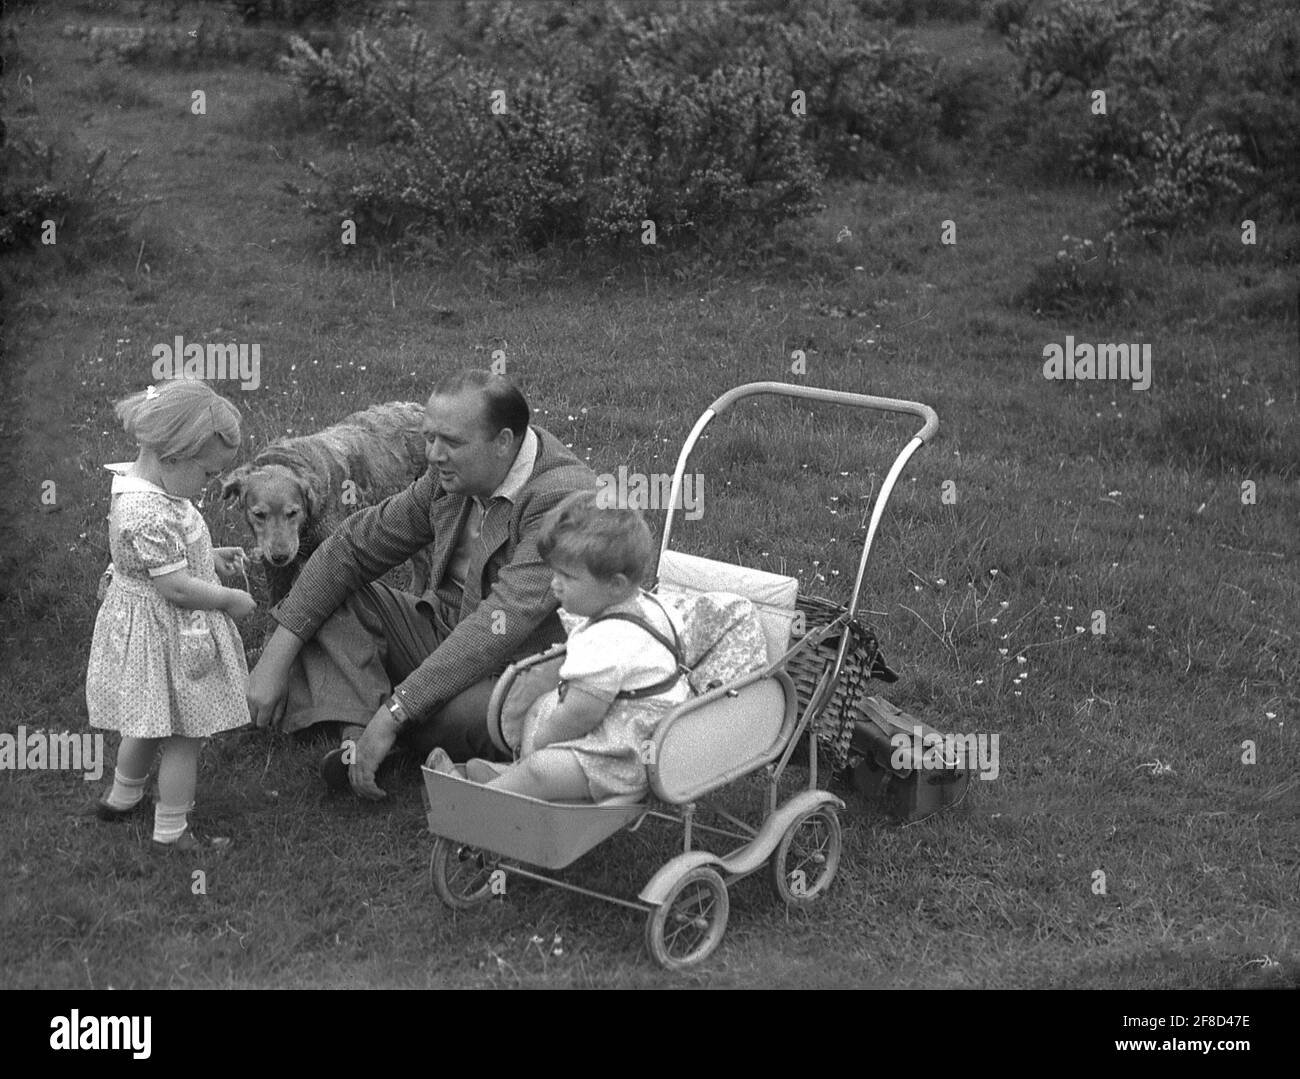 1950s, historical, sitting outside on a grassy spot, a father with his two young children, a toddler or infant sitting in a metal frame pushchair or buggy of the era, with attached footrest and pillow for support, and a little girl. Also with them, their pet dog. Stock Photo